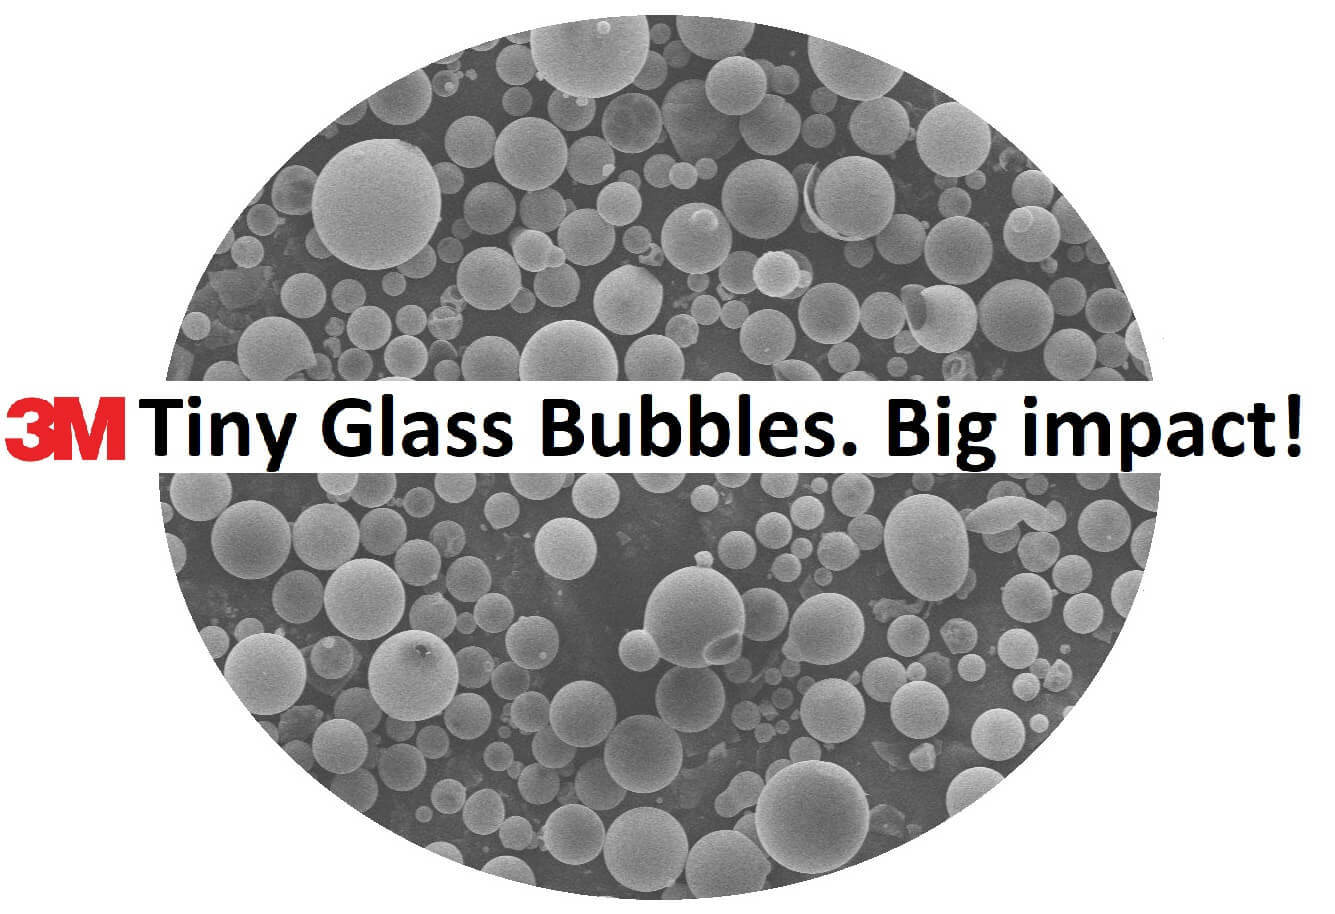 3M's glass bubbles help NASA launch into space